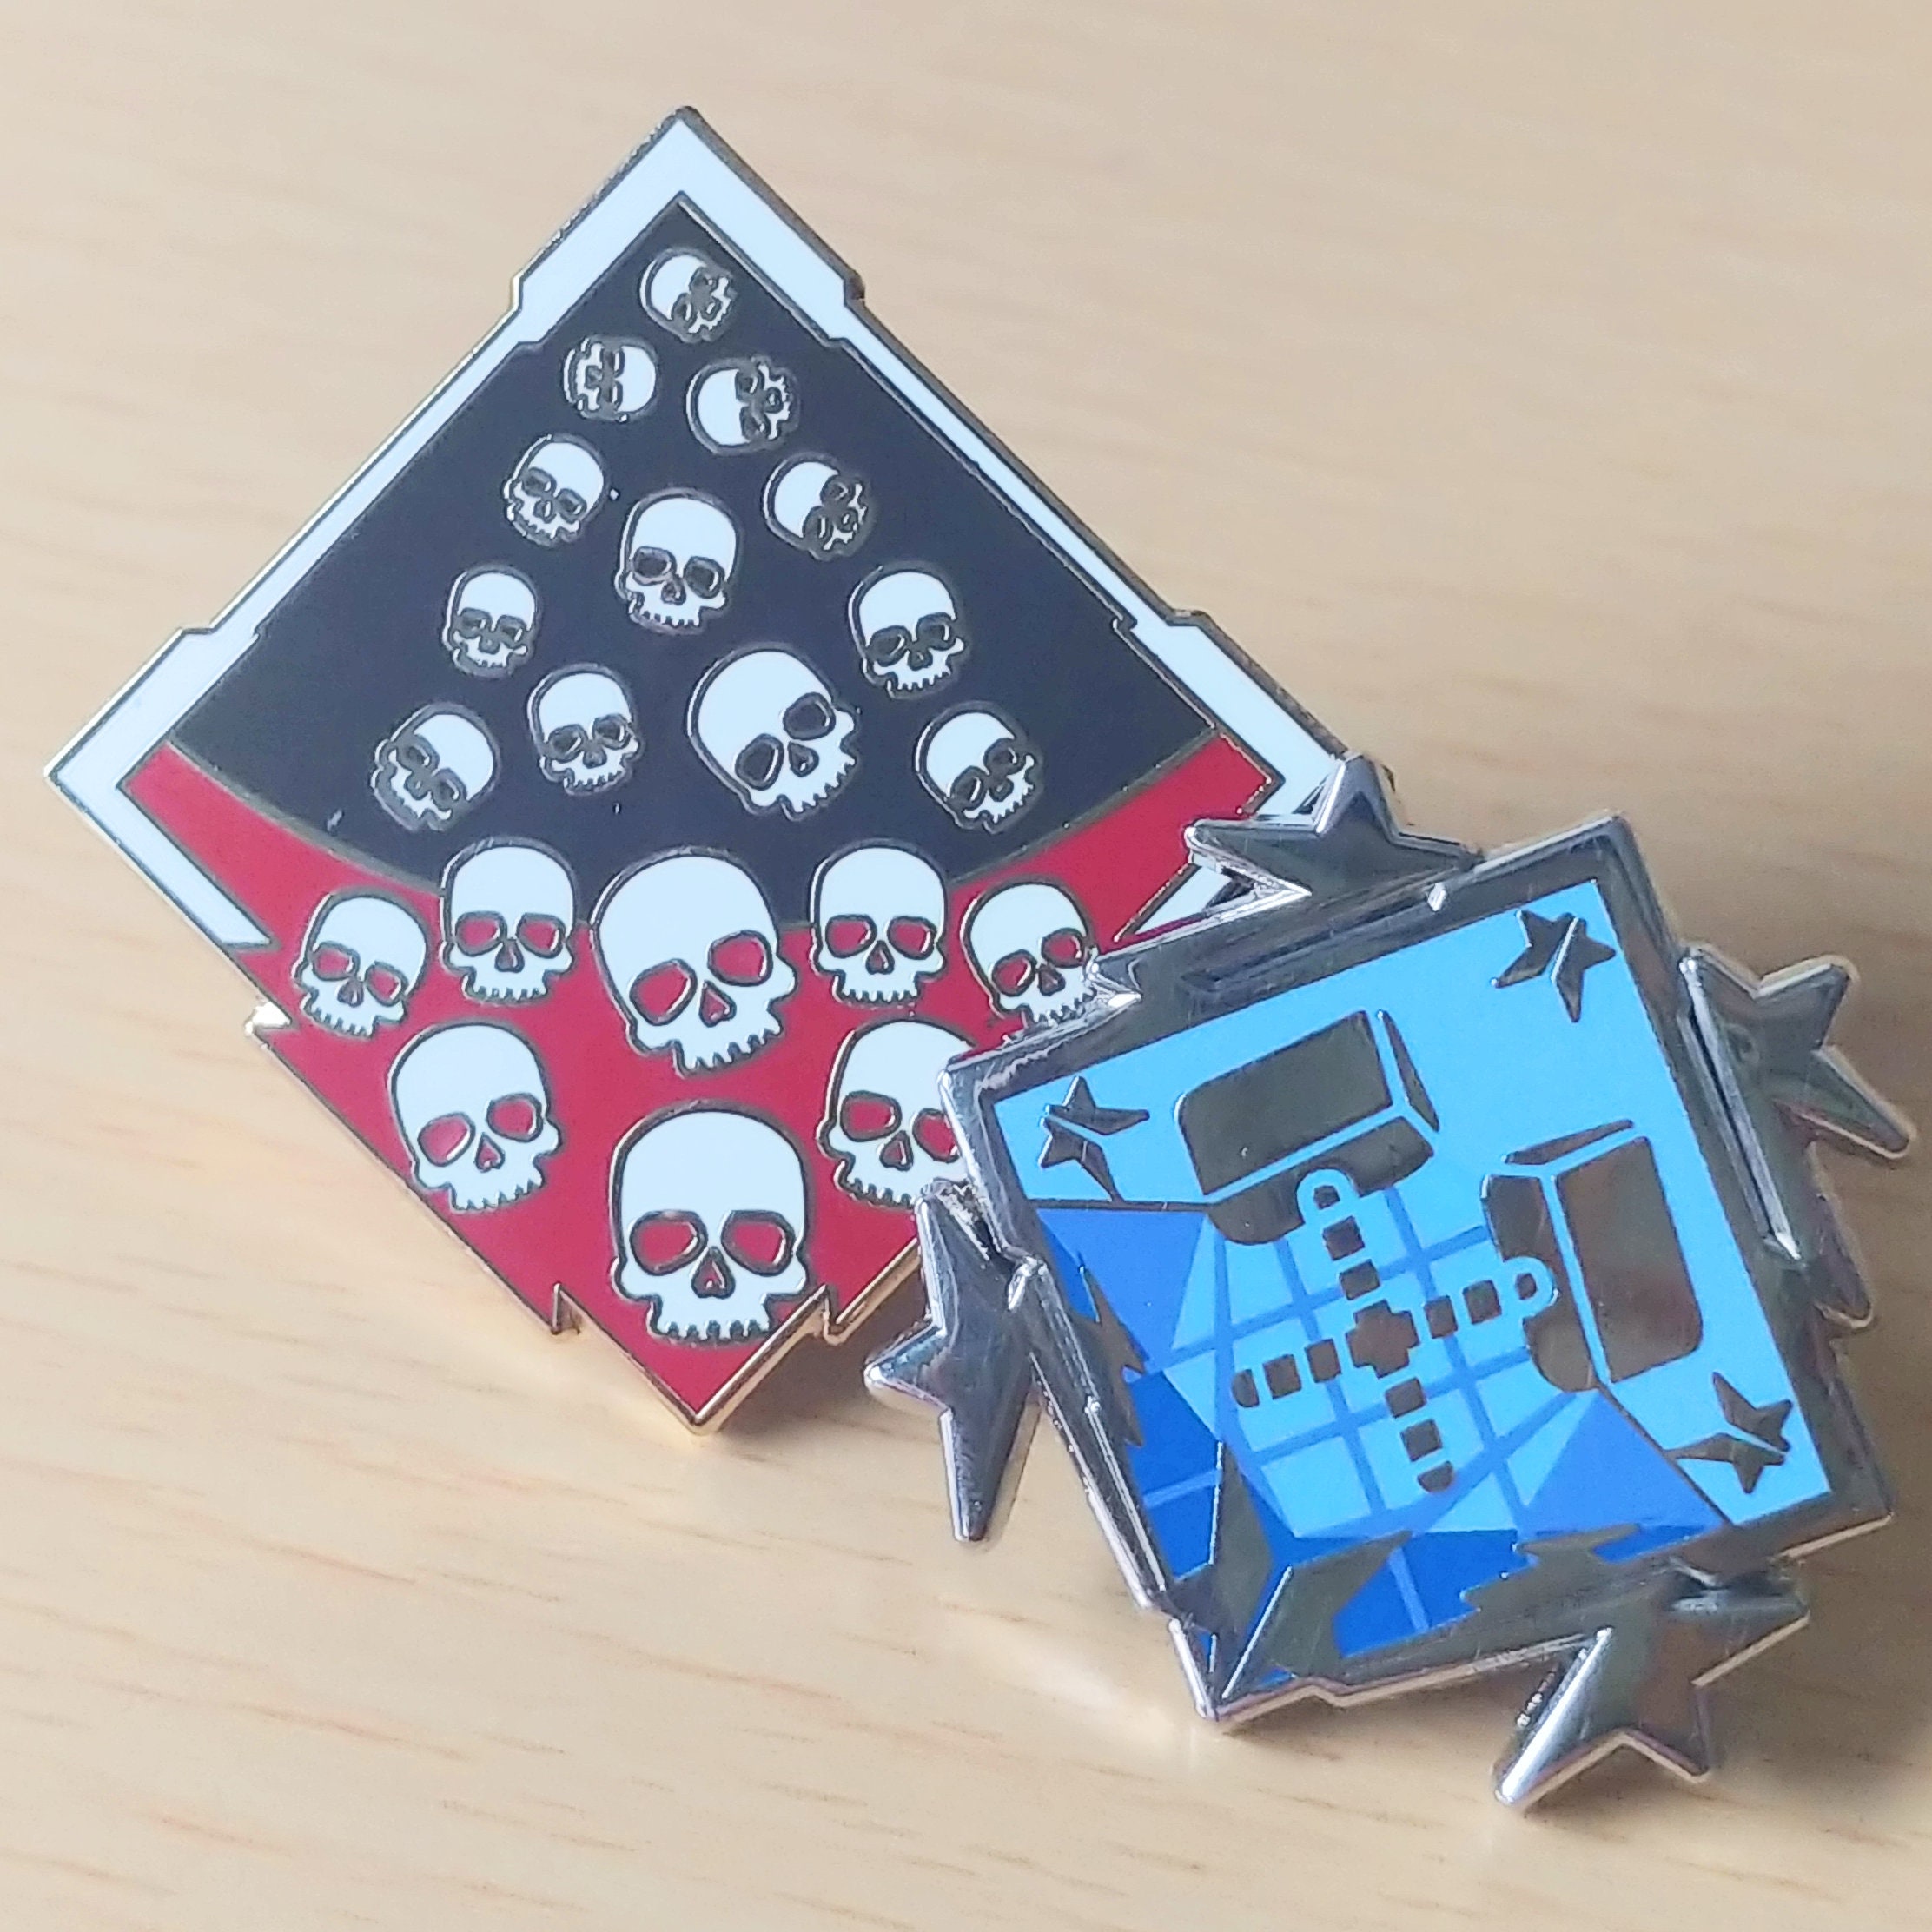 Selling] apex legend badge..only pC